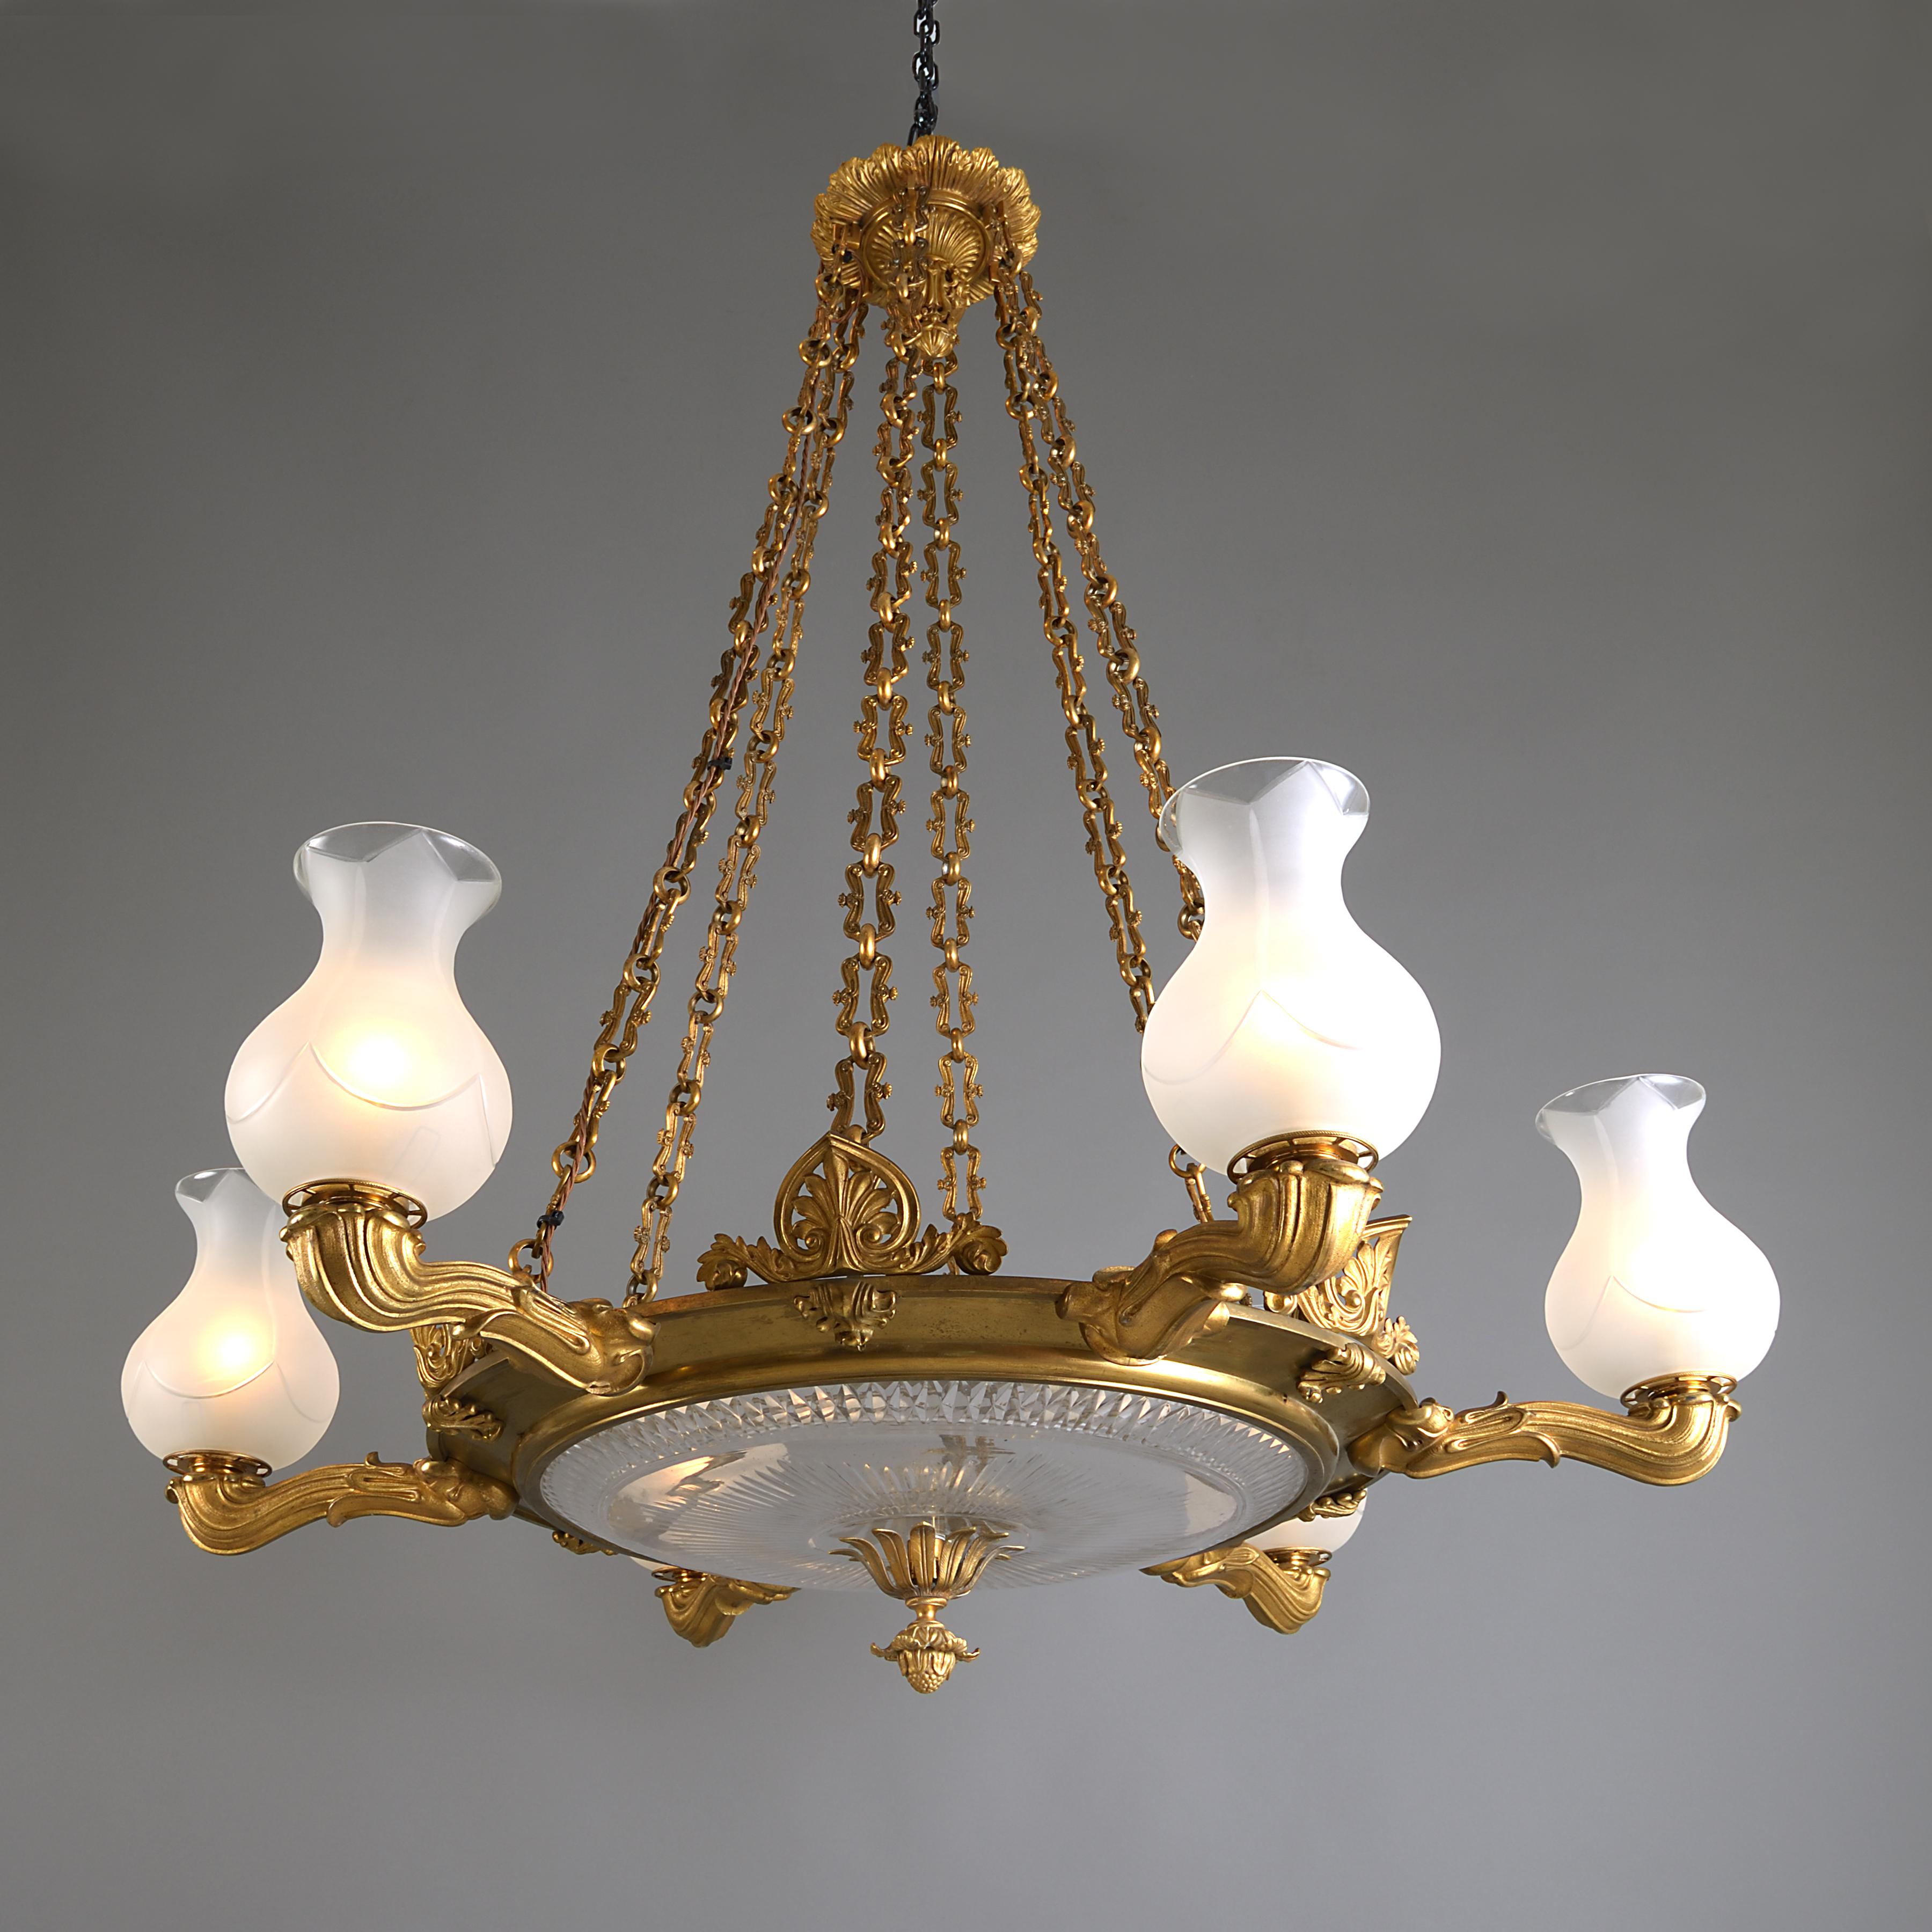 A fine and large Regency lacquered brass and cut-glass six-light colza chandelier, circa 1815.